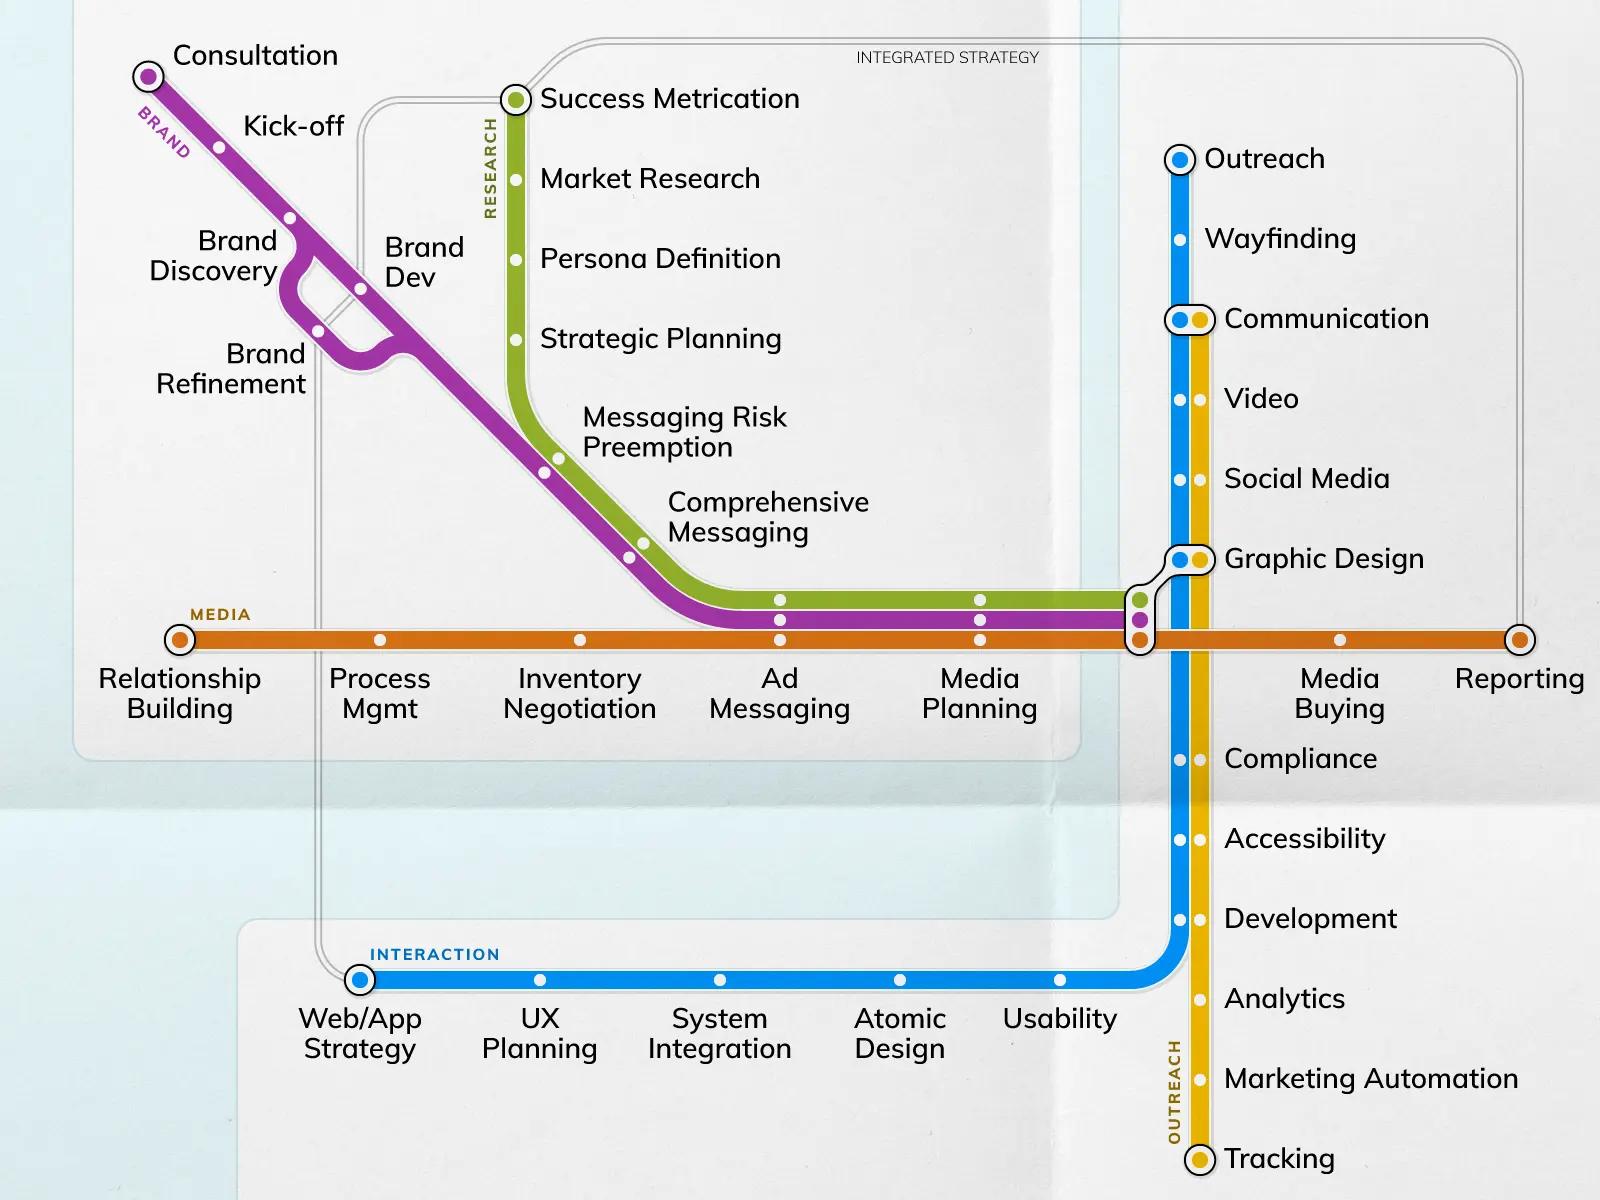 D2 services for the transportation sector, stylized as a transit map. Line 1 (Brand): Consultation, Kick-off, Brand Discovery, Brand Development, Brand Refinement. Line 2 (Research): Success Metrication, Market Research, Persona Definition, Strategic Planning. Line 1+2 (Market Strategy): Messaging Risk Preemption, Comprehensive Messaging. Line 3 (Media): Relationship Building, Process Management, Inventory Negotiation, Media Buying, Reporting. Line 1+2+3 (Advertising): Ad Messaging, Media Planning, Graphic Design. Line 4 (Digital/Usability): Web/App Strategy, UX Planning, System Integration, Atomic Design, Usability, Wayfinding, Outreach. Line 5 (Analytics): Tracking, Marketing Automation, Analytics. Line 4+5 (Outreach): Development, Accessibility, Compliance, Graphic Design, Social Media, Video, Communication